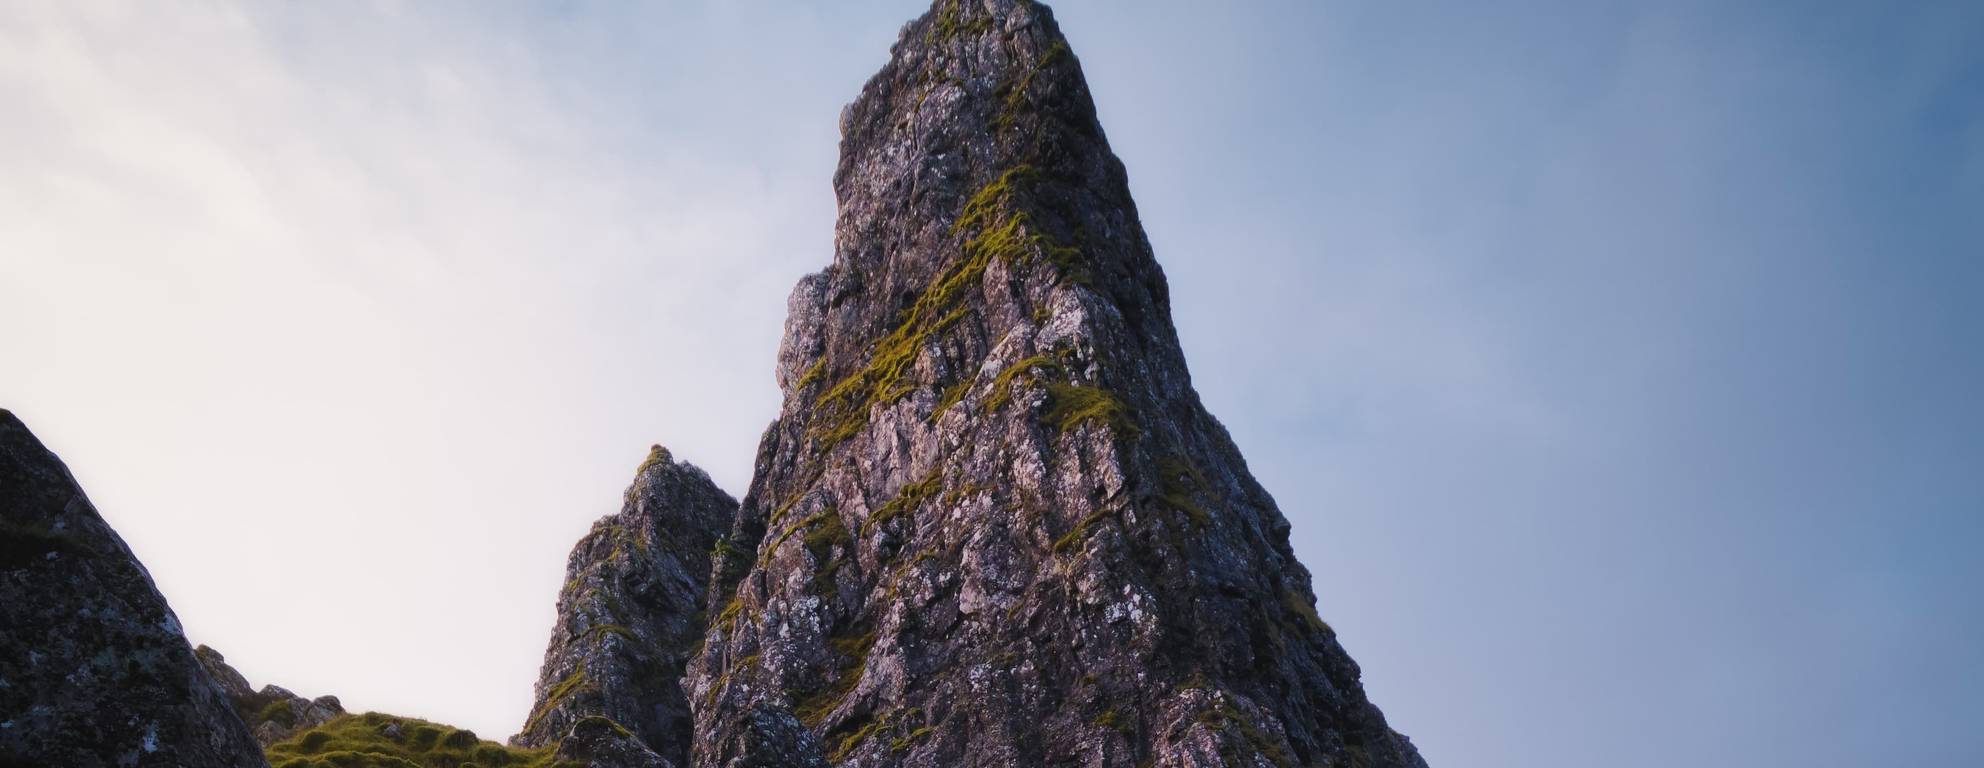 A photo of the Storr rock formation in Scotland—a symbol of integrity and strength